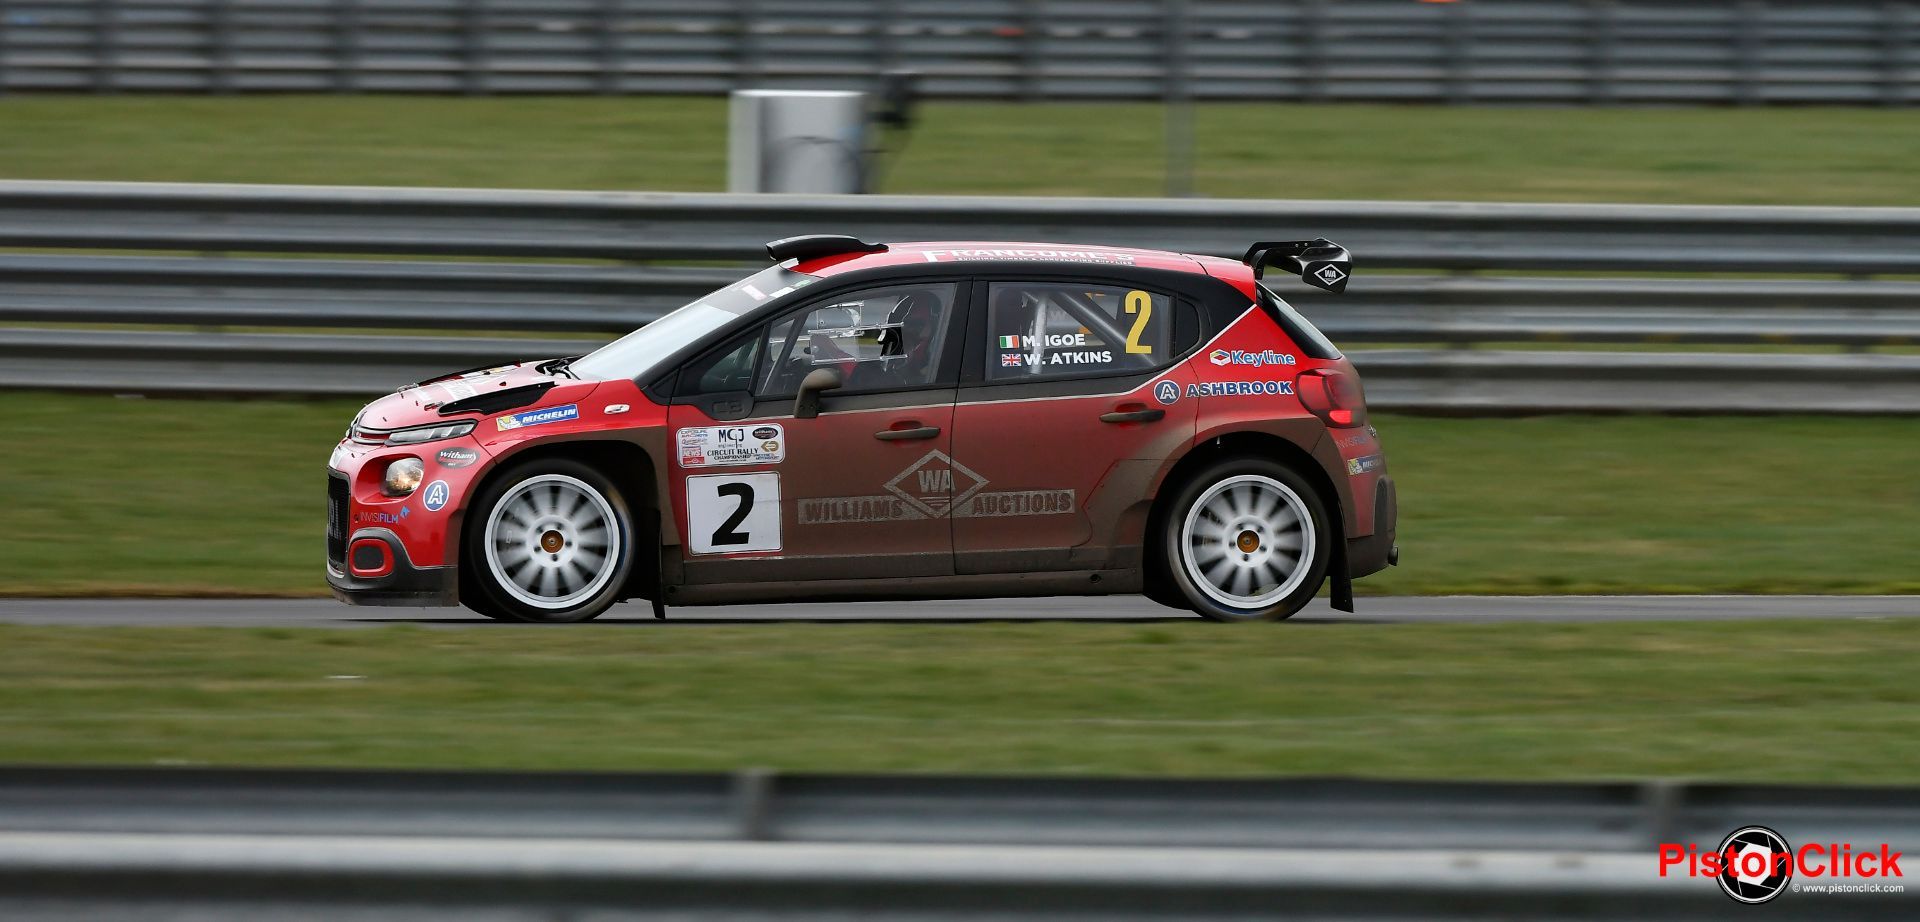 Overall winners Michael Igoe and Will Atkins in the Citroen C3 Rally at the Anglia Motor Sport Club Snetterton Stage Rally